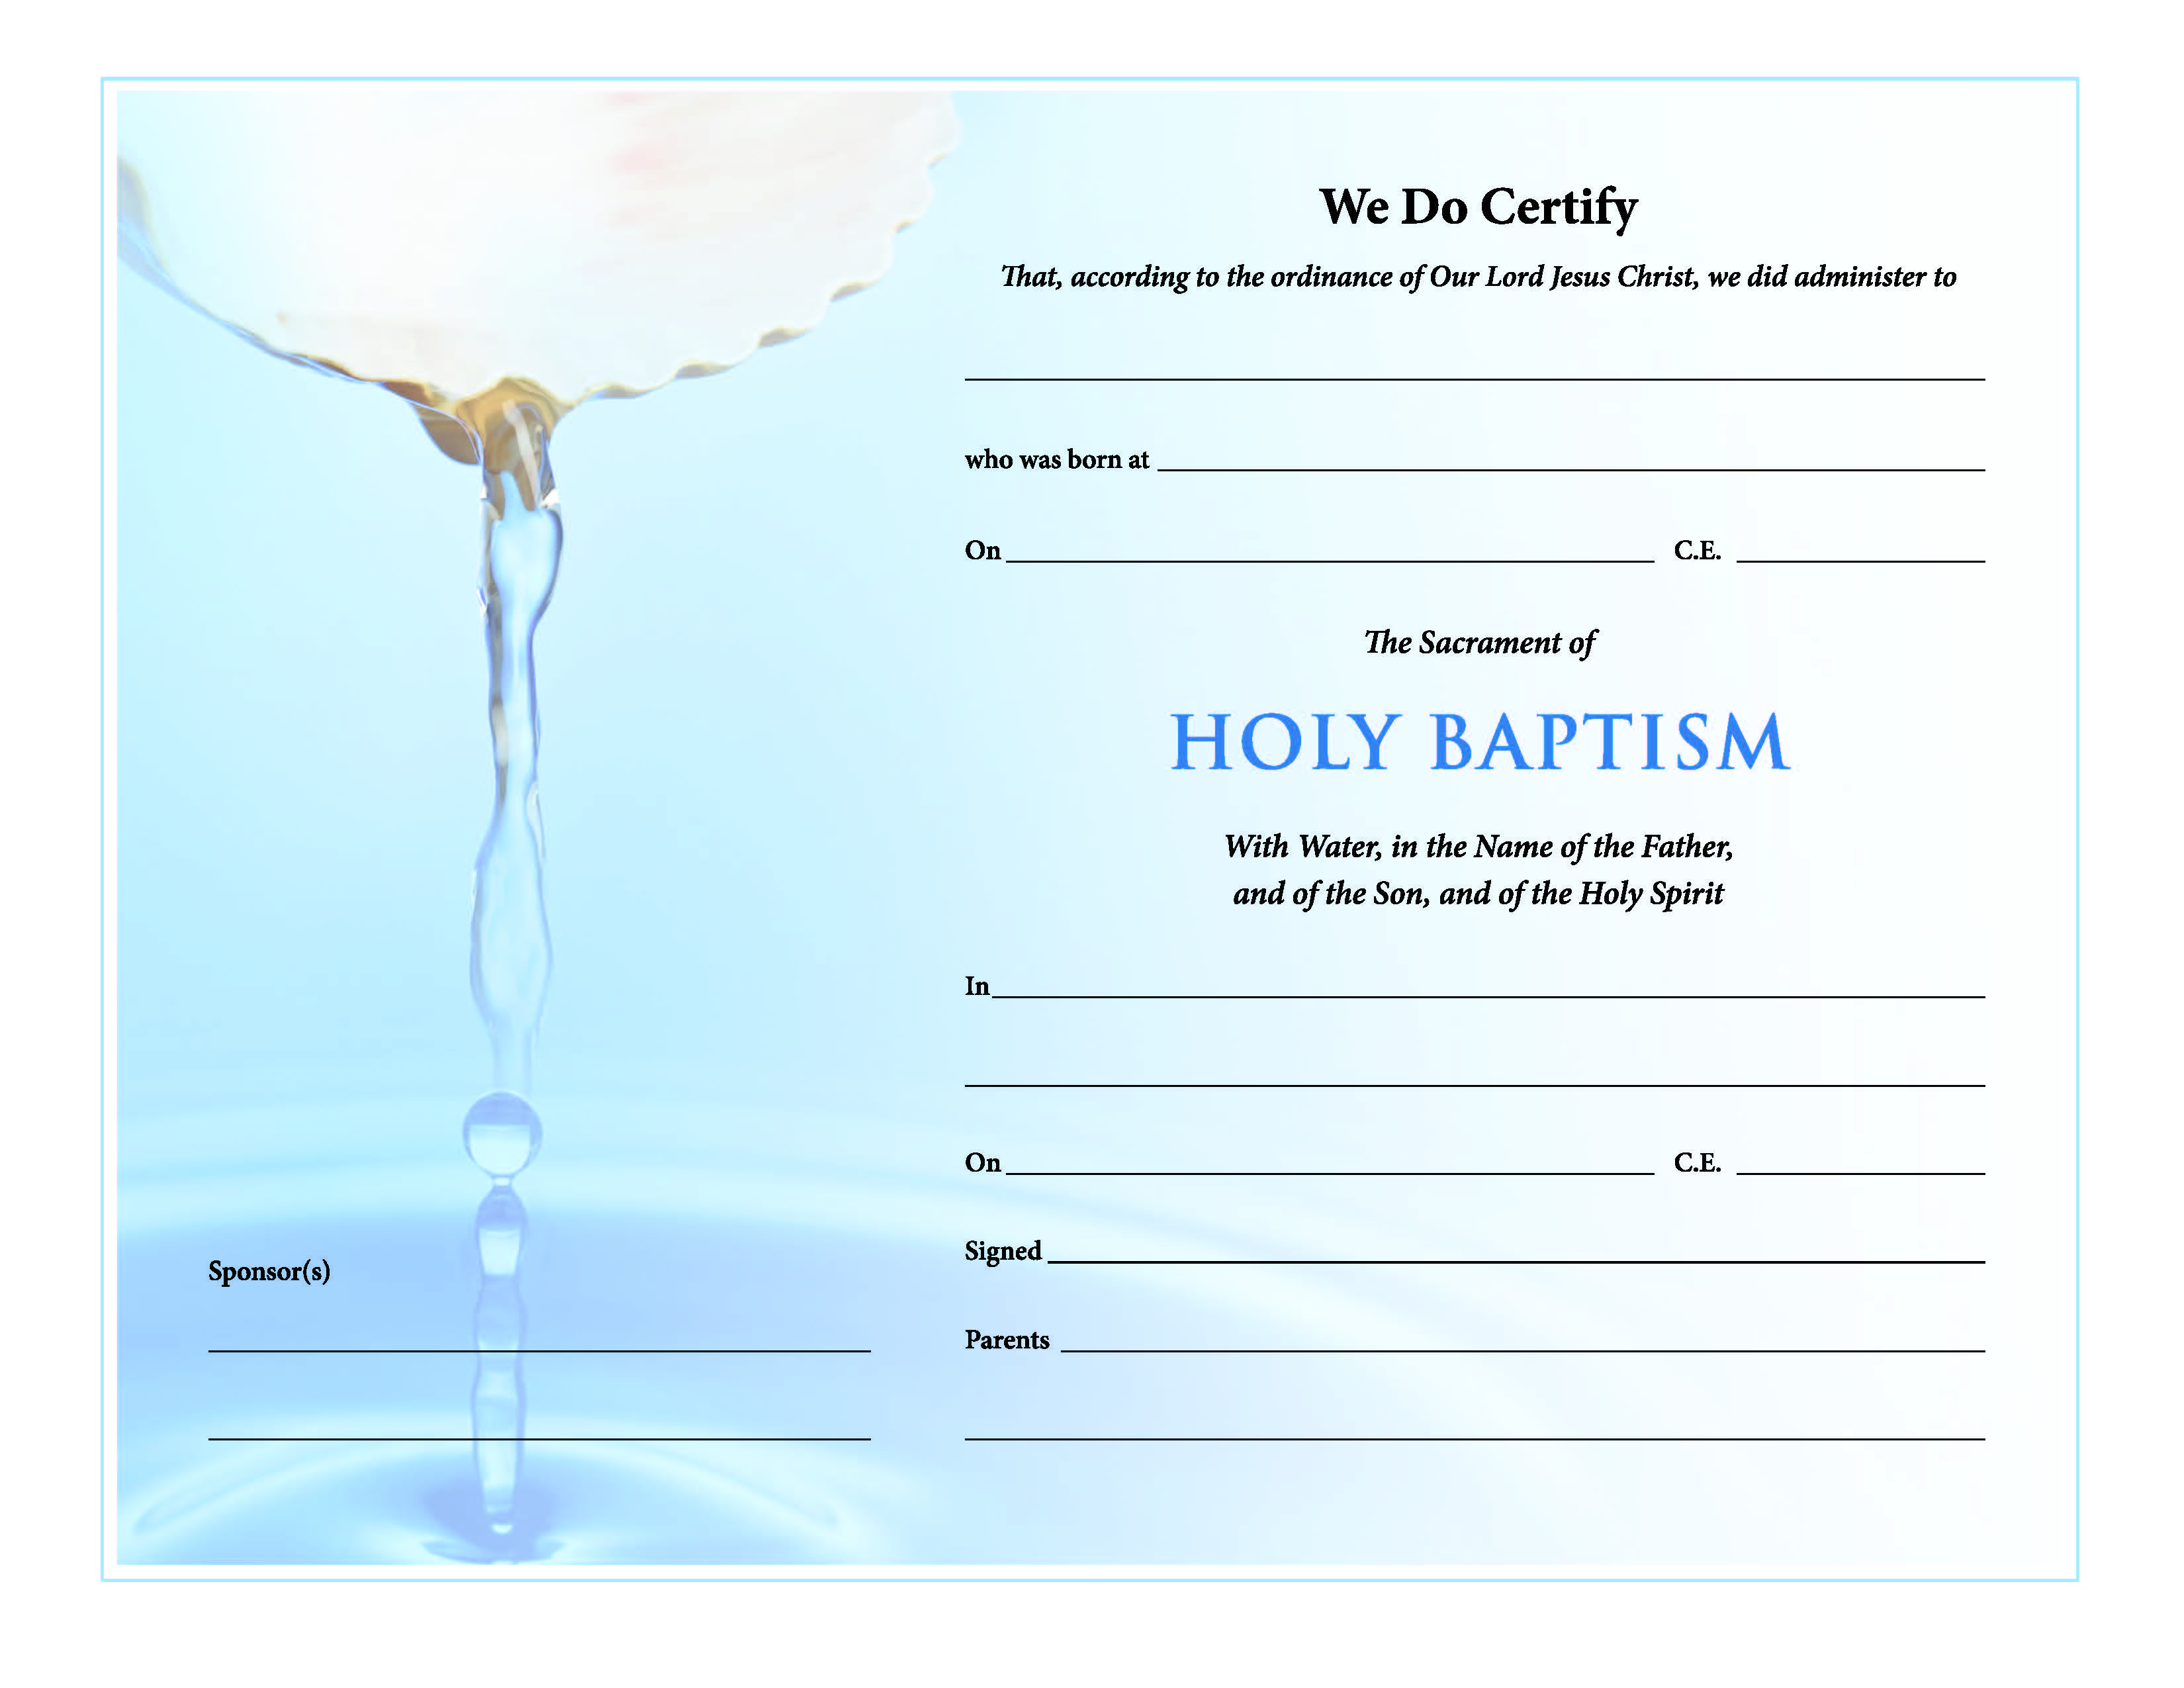 ChurchPublishing.org: Holy Baptism Certificate - Download Intended For Christian Baptism Certificate Template